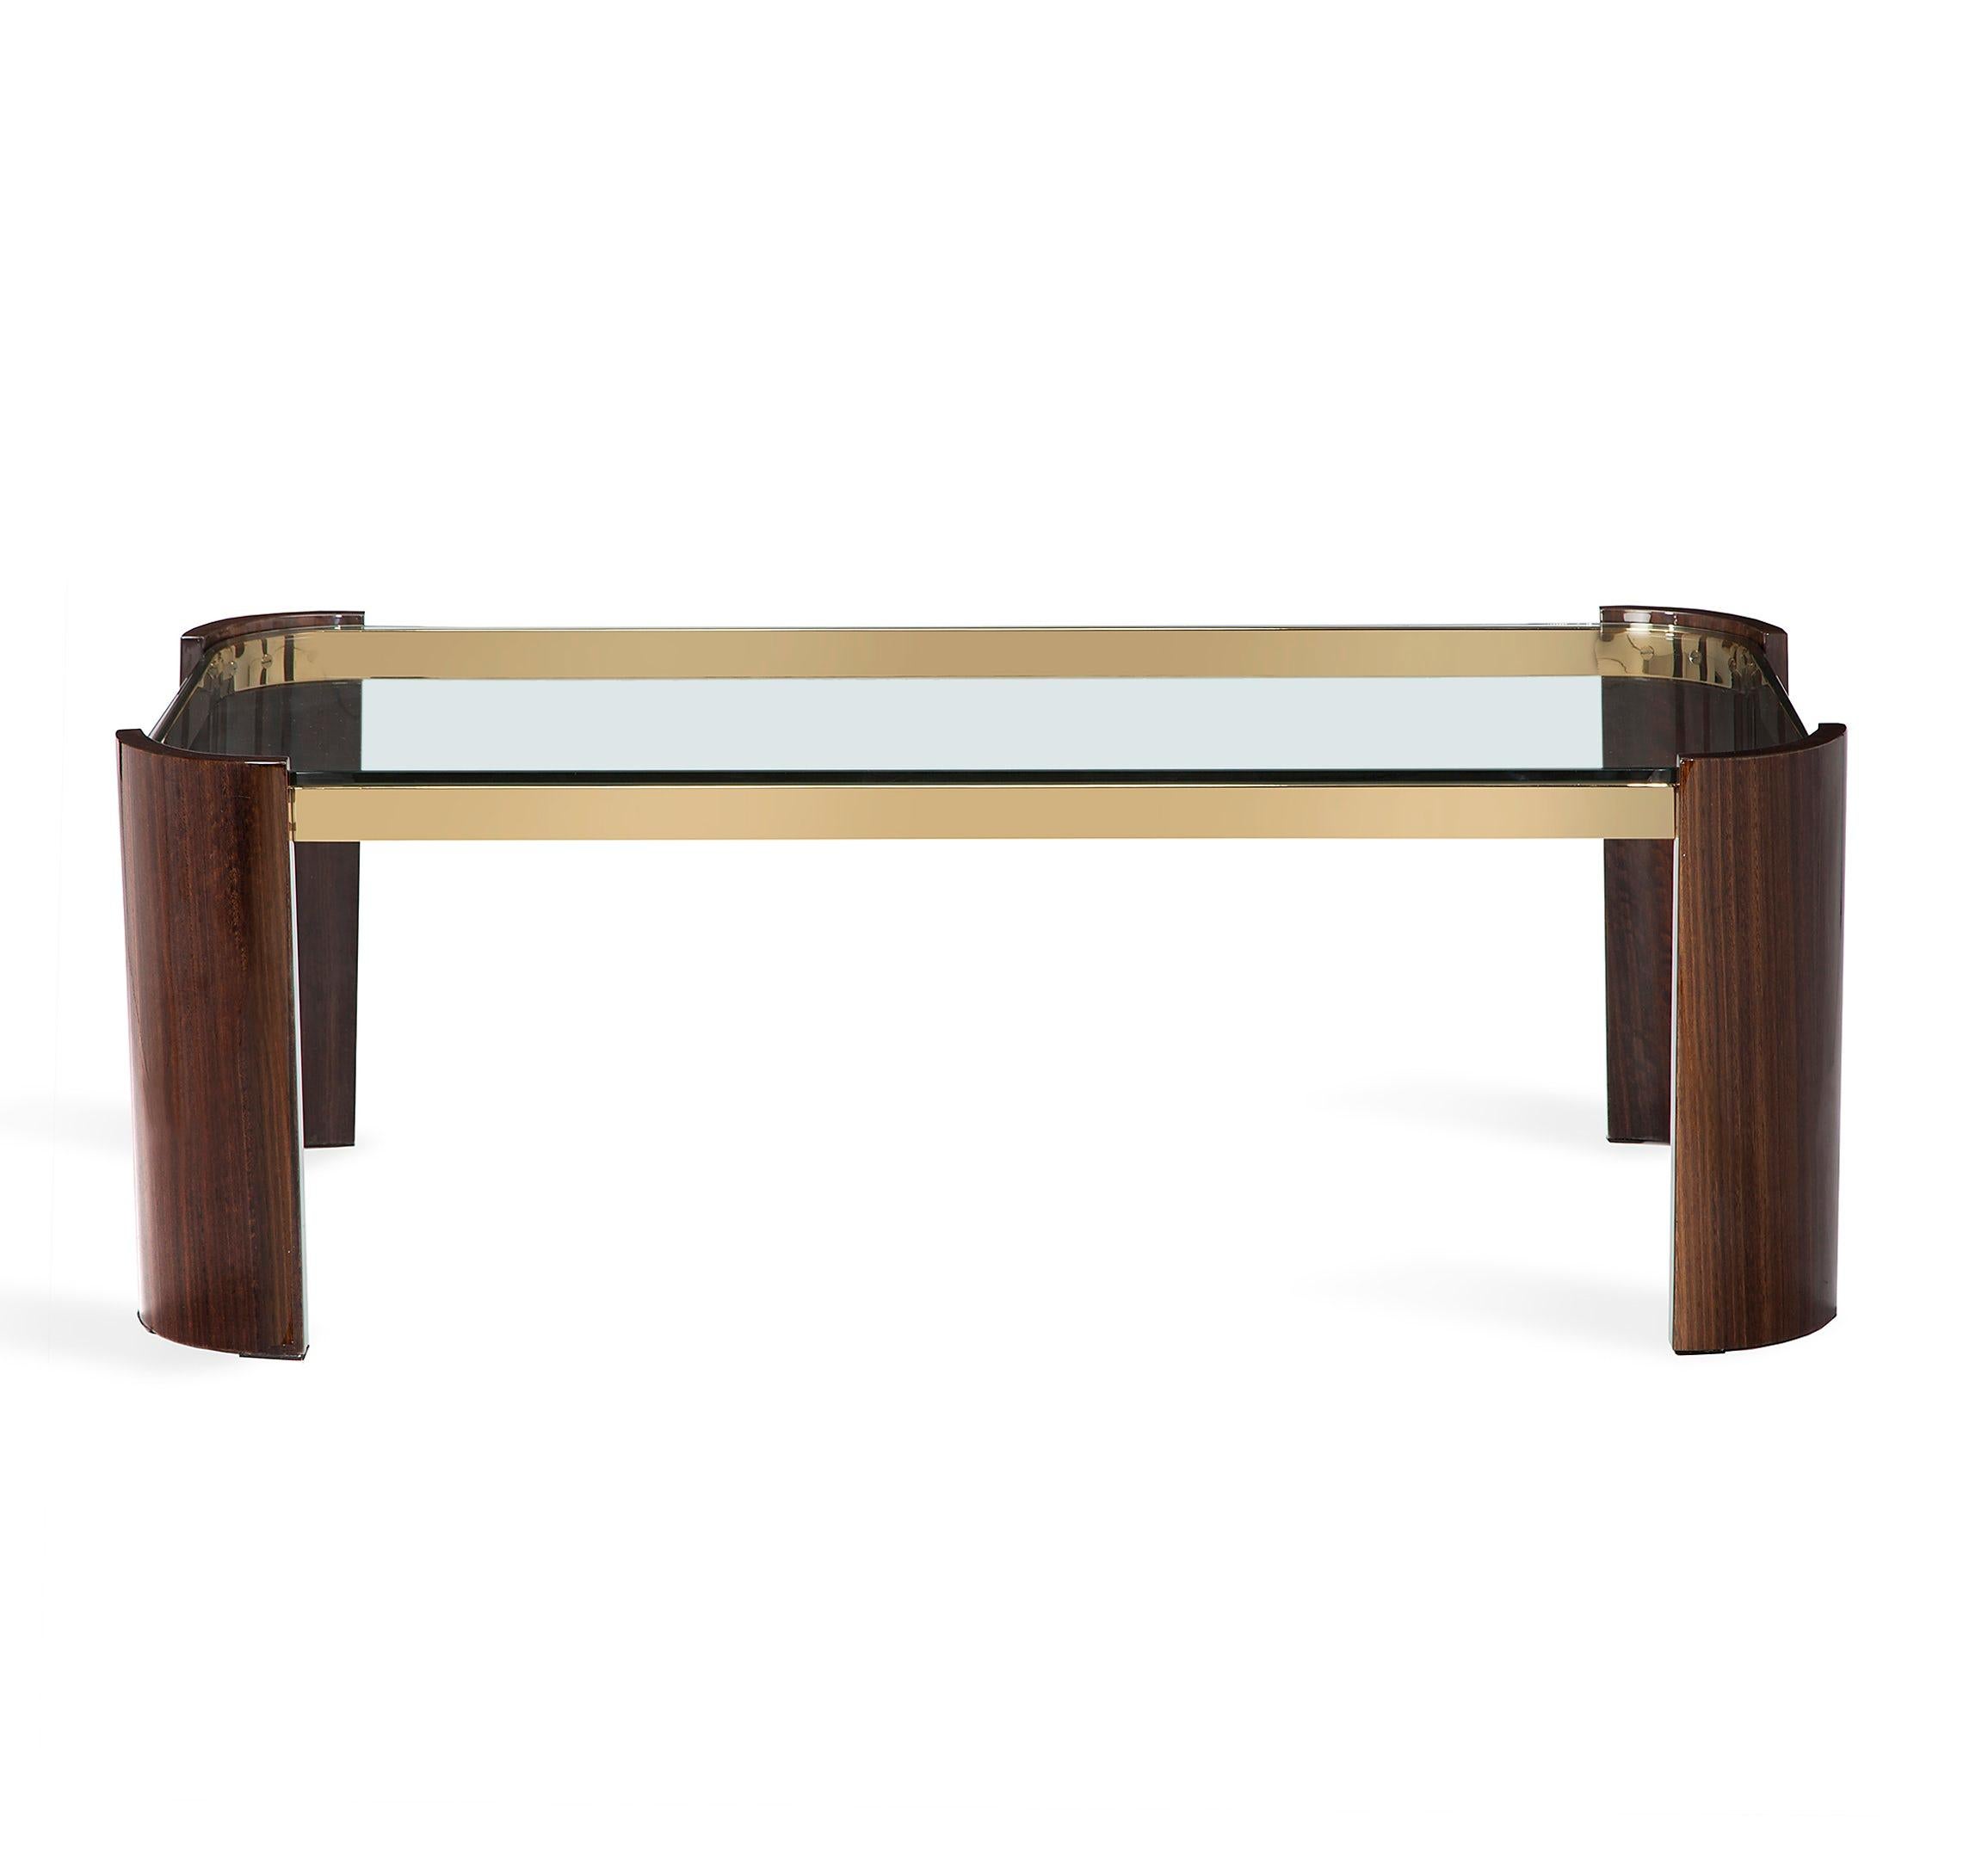 Contemporary coffee tables with figured eucalyptus legs, gold table frames, and glass top.